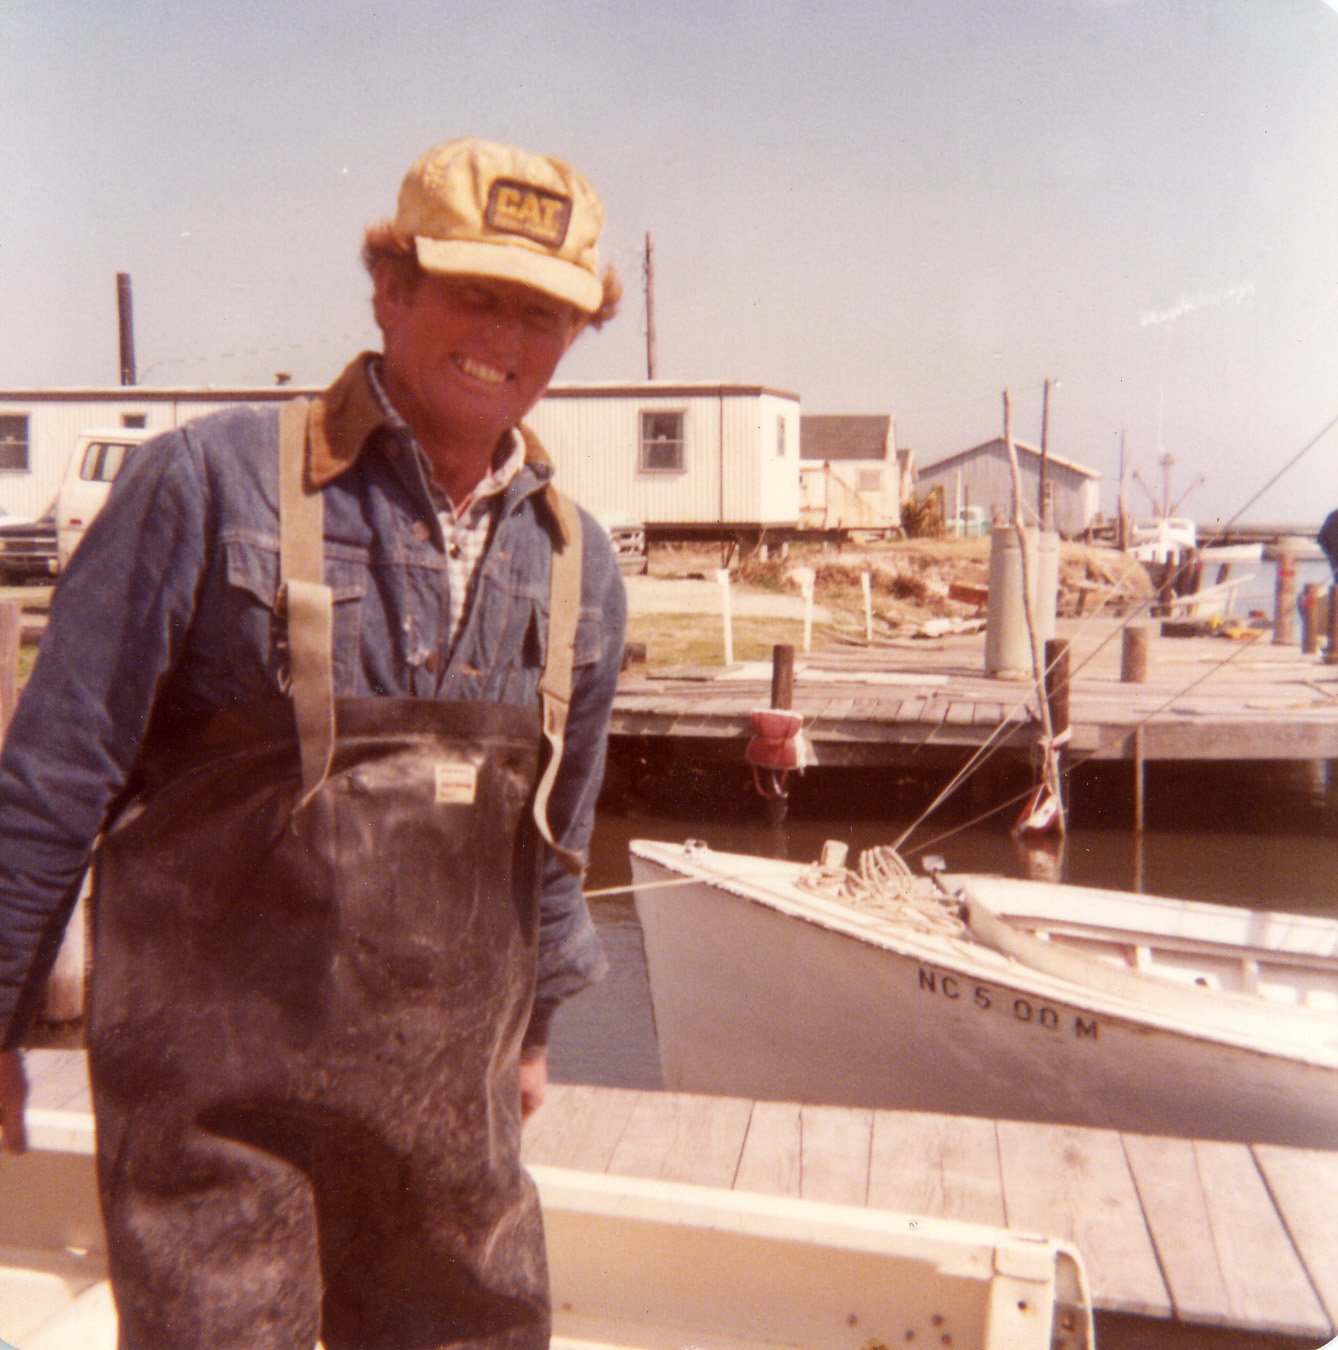 Red Brooks unloading clams at Miss Harkers Harbor, Clayton Fulcher’s Fishhouse in background, 1978.